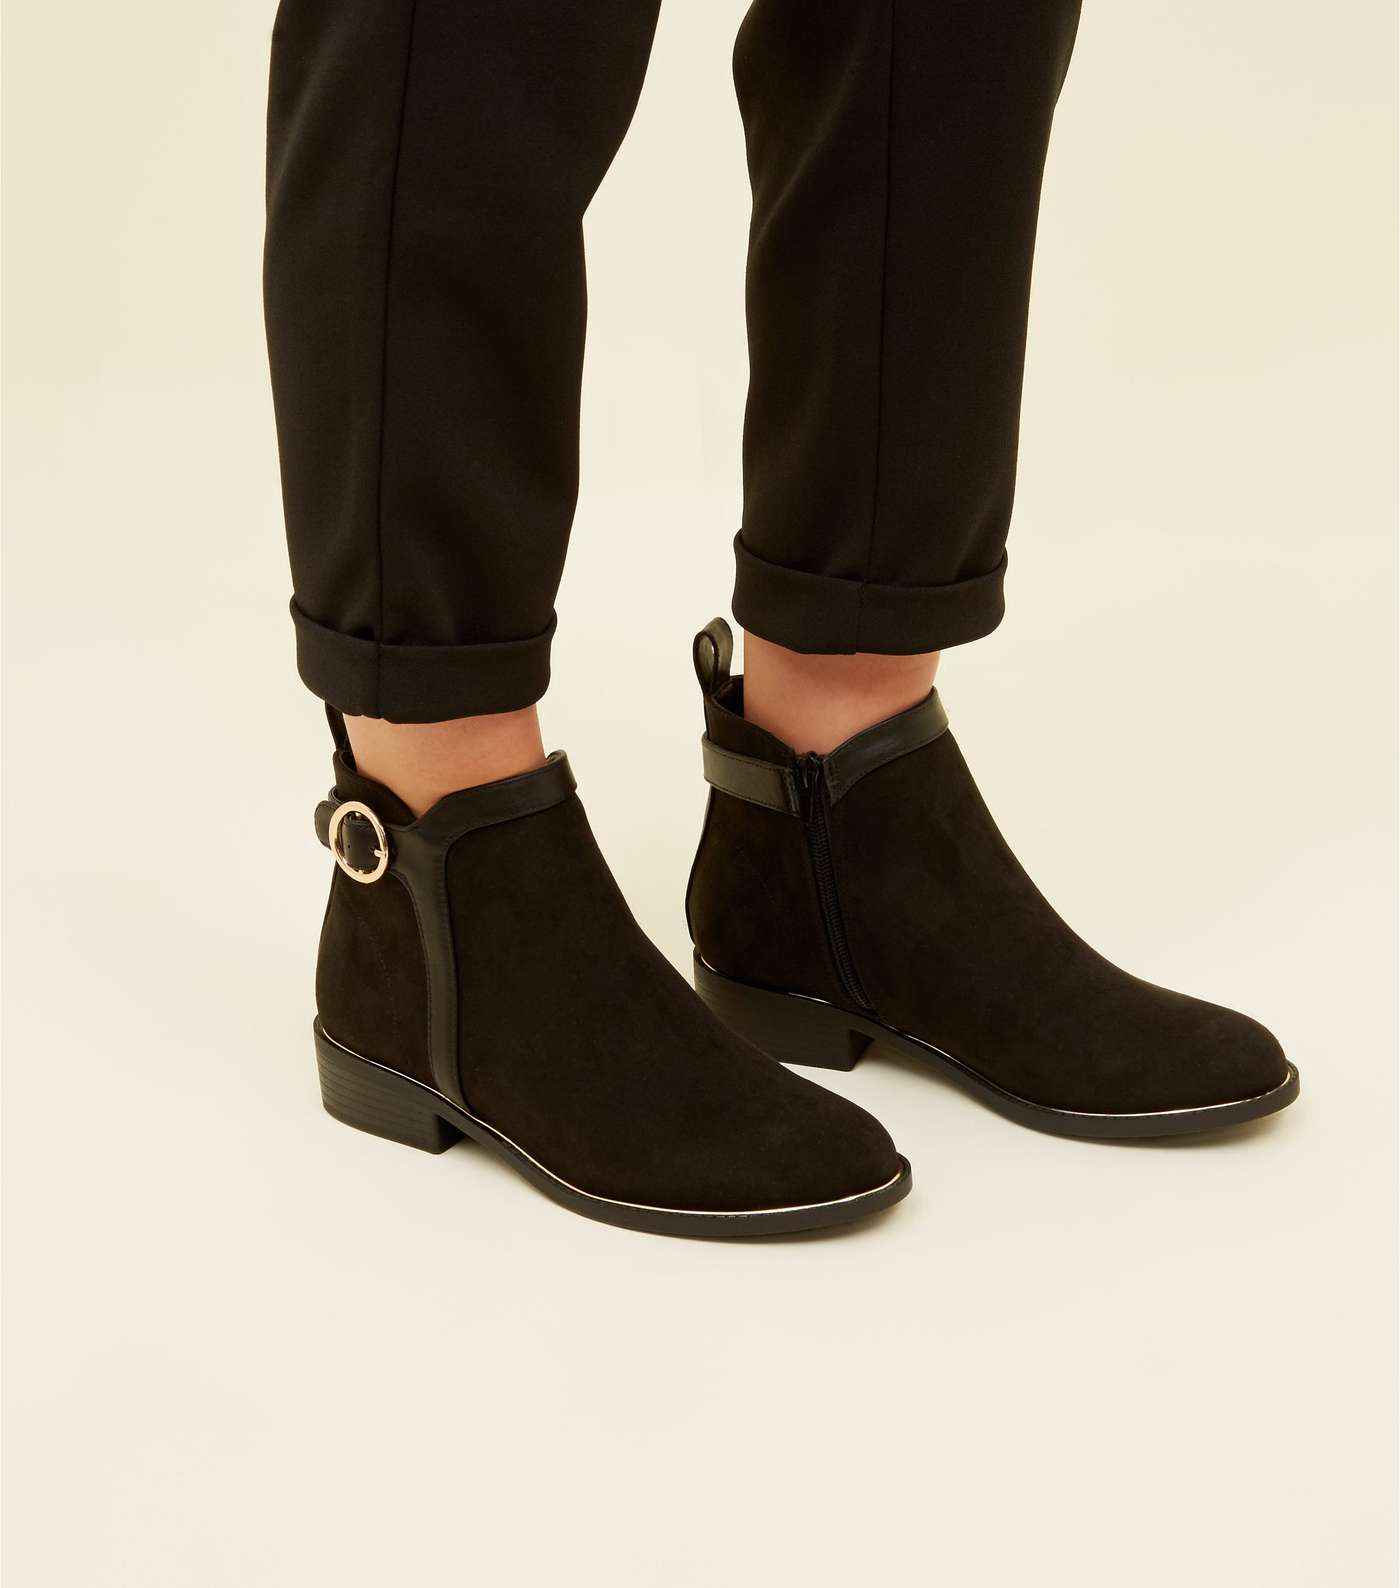 Girls Black Suedette Buckle Ankle Boots Image 2